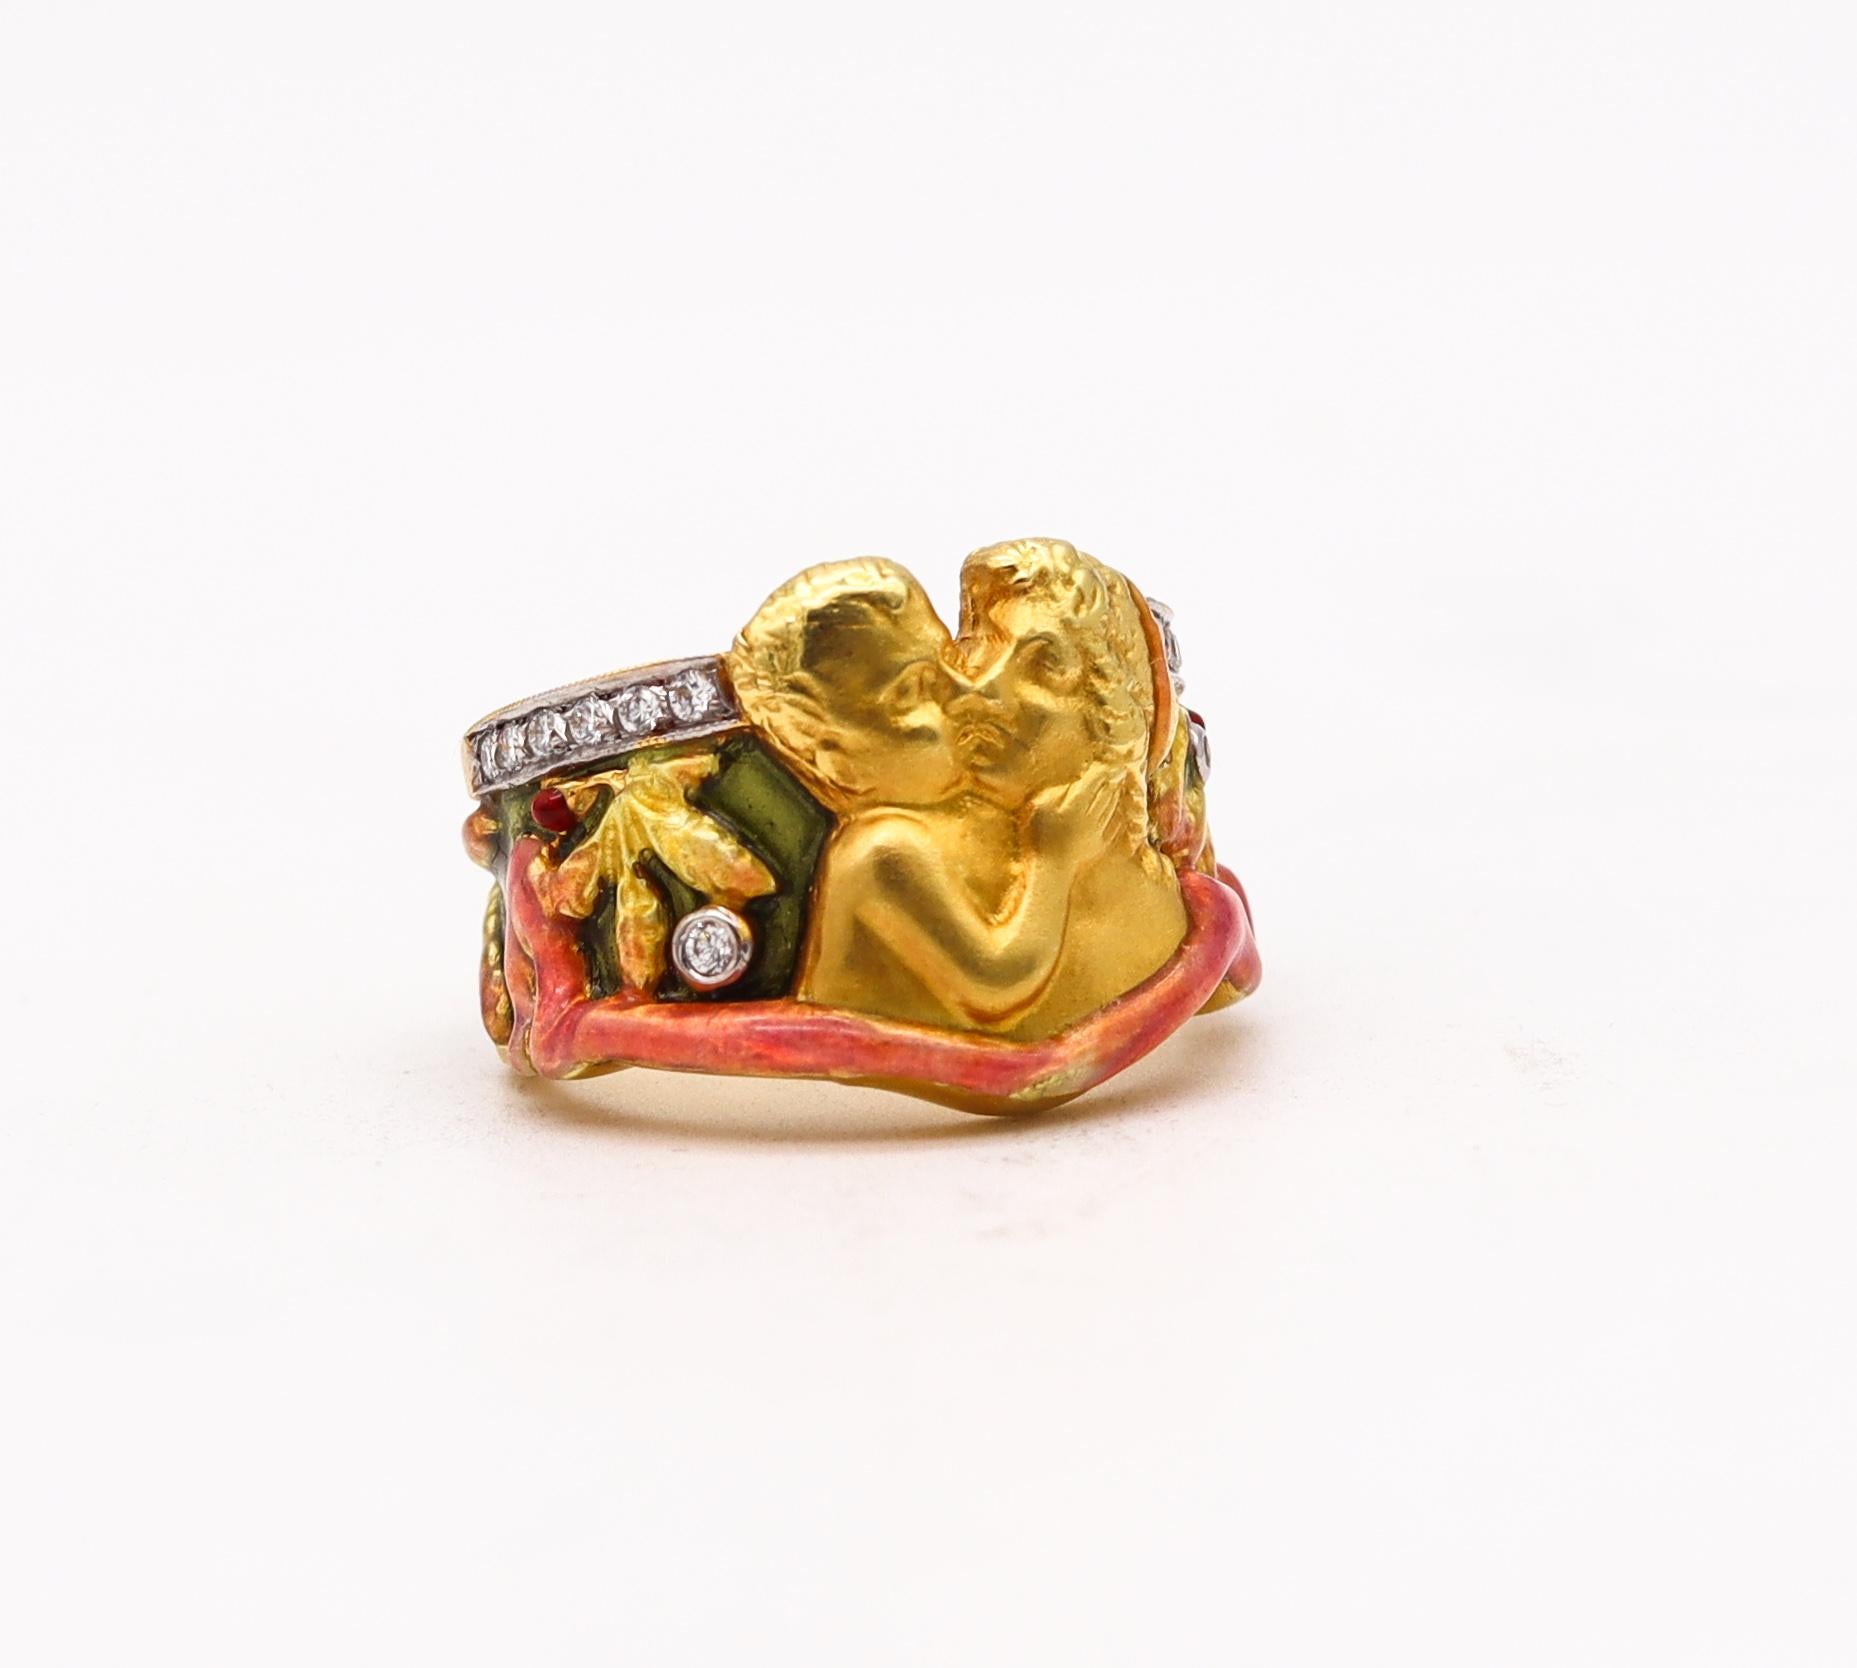 Brilliant Cut Masriera Art Nouveau Enameled Ring in 18kt Yellow Gold with VS Diamonds For Sale